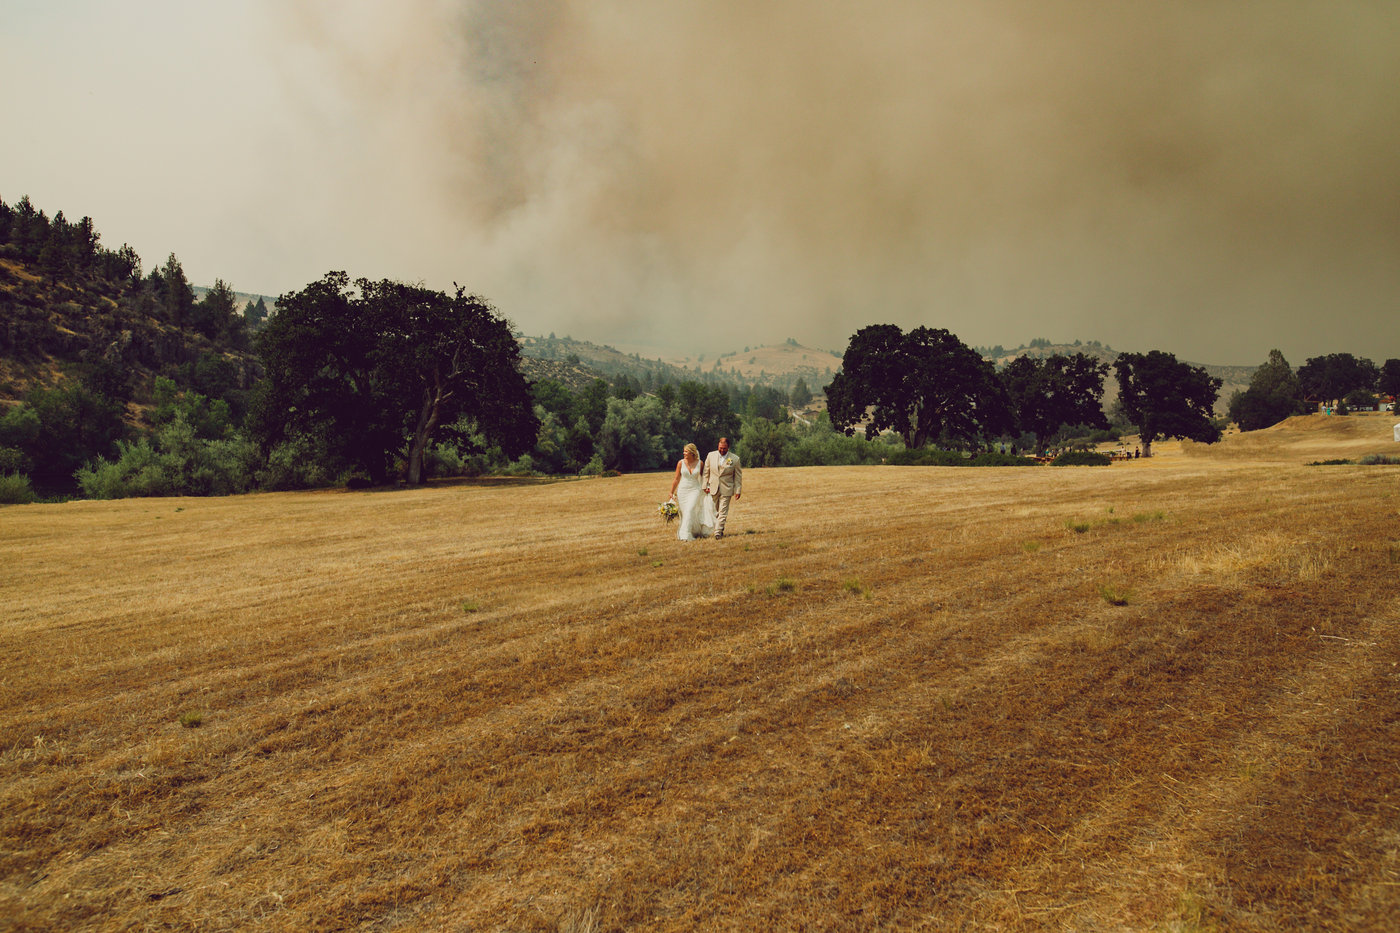 Wedding insurance for wildfires in california